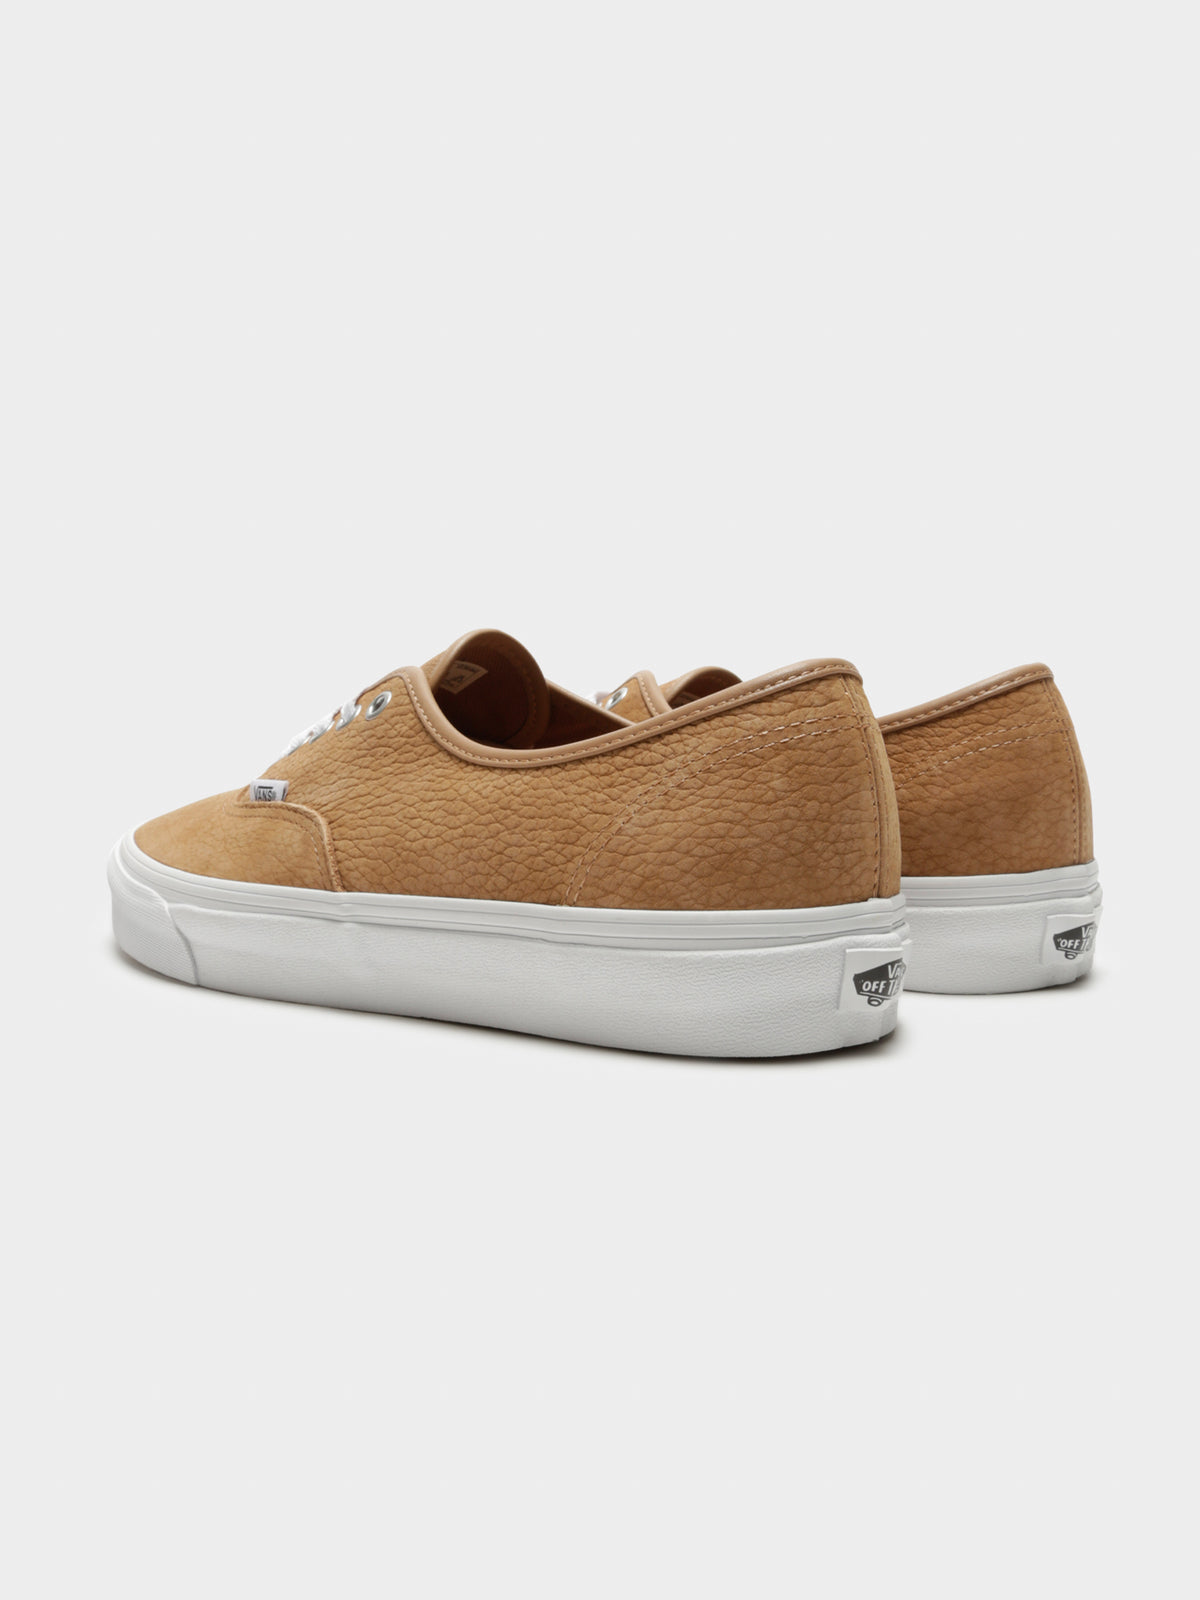 Mens Authentic Sneakers in Grain Leather Camel